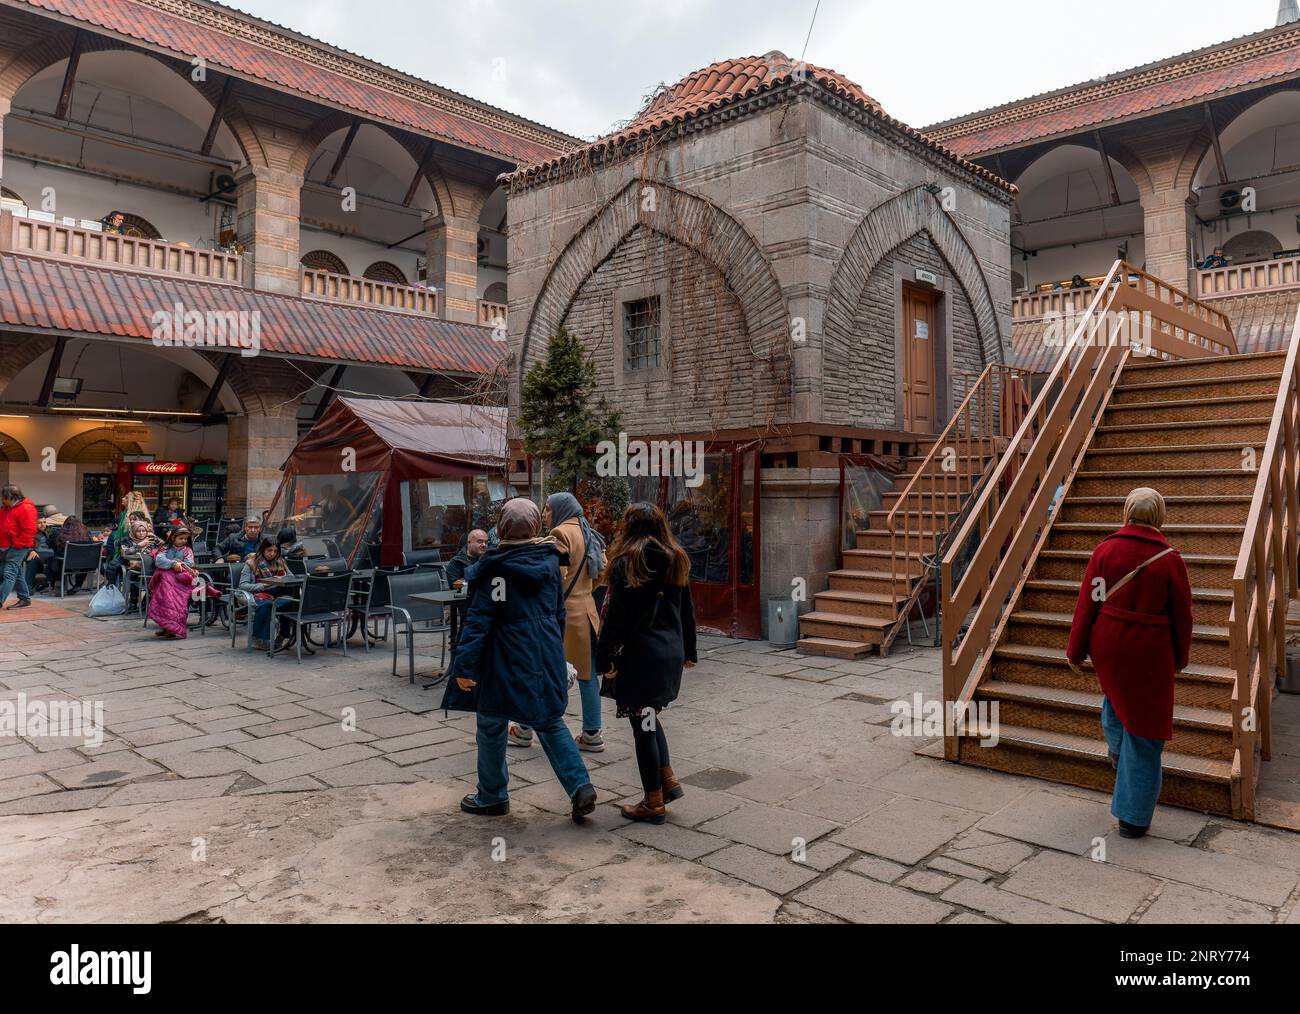 Ankara-Turkey: February 25, 2023: Local people and tourists shopping or sitting at cafe and talking in historical Suluhan caravanserai, constructred b Stock Photo